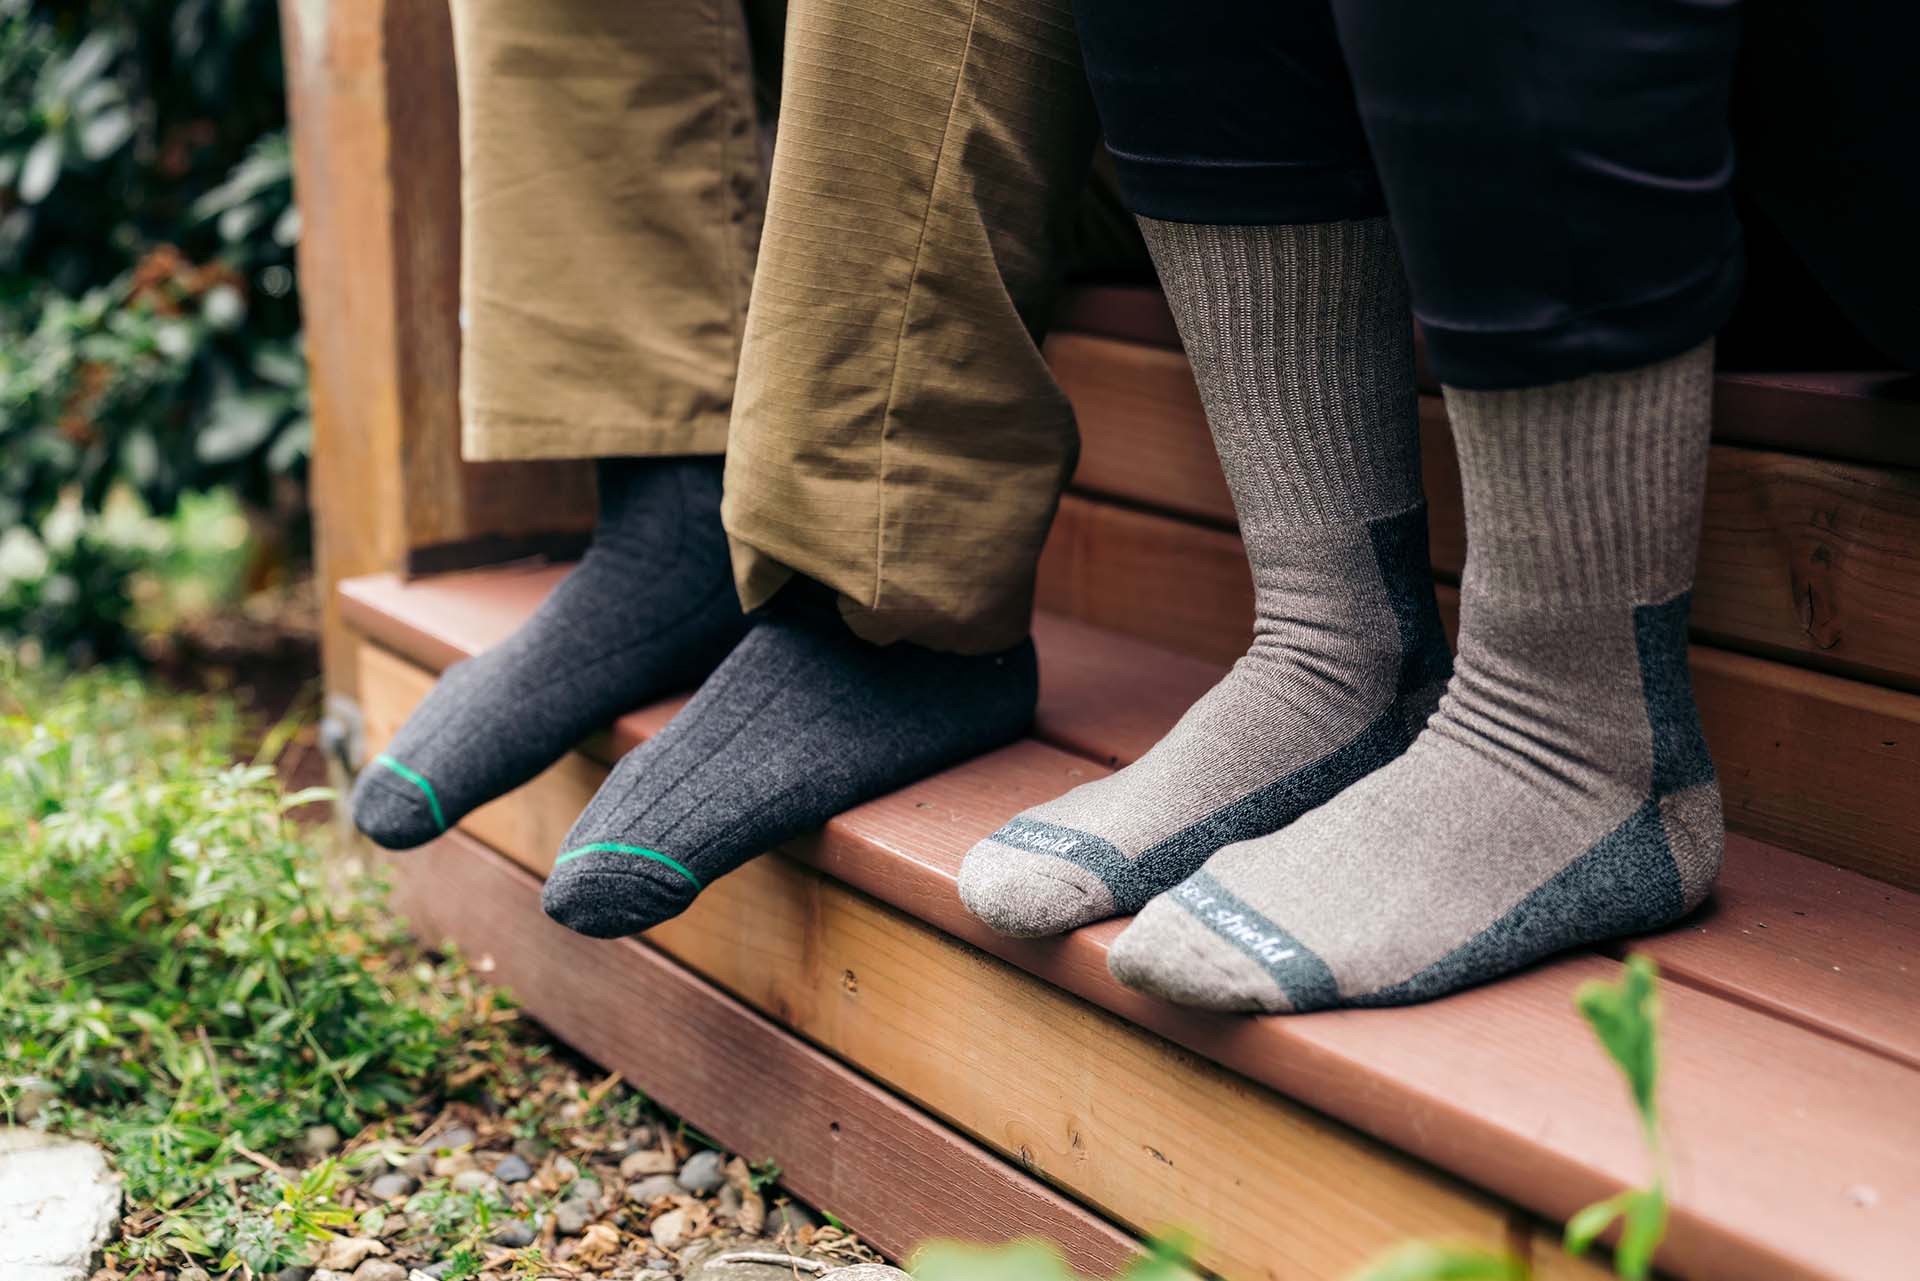 Man and woman wearing permethrin treated socks by Insect Shield